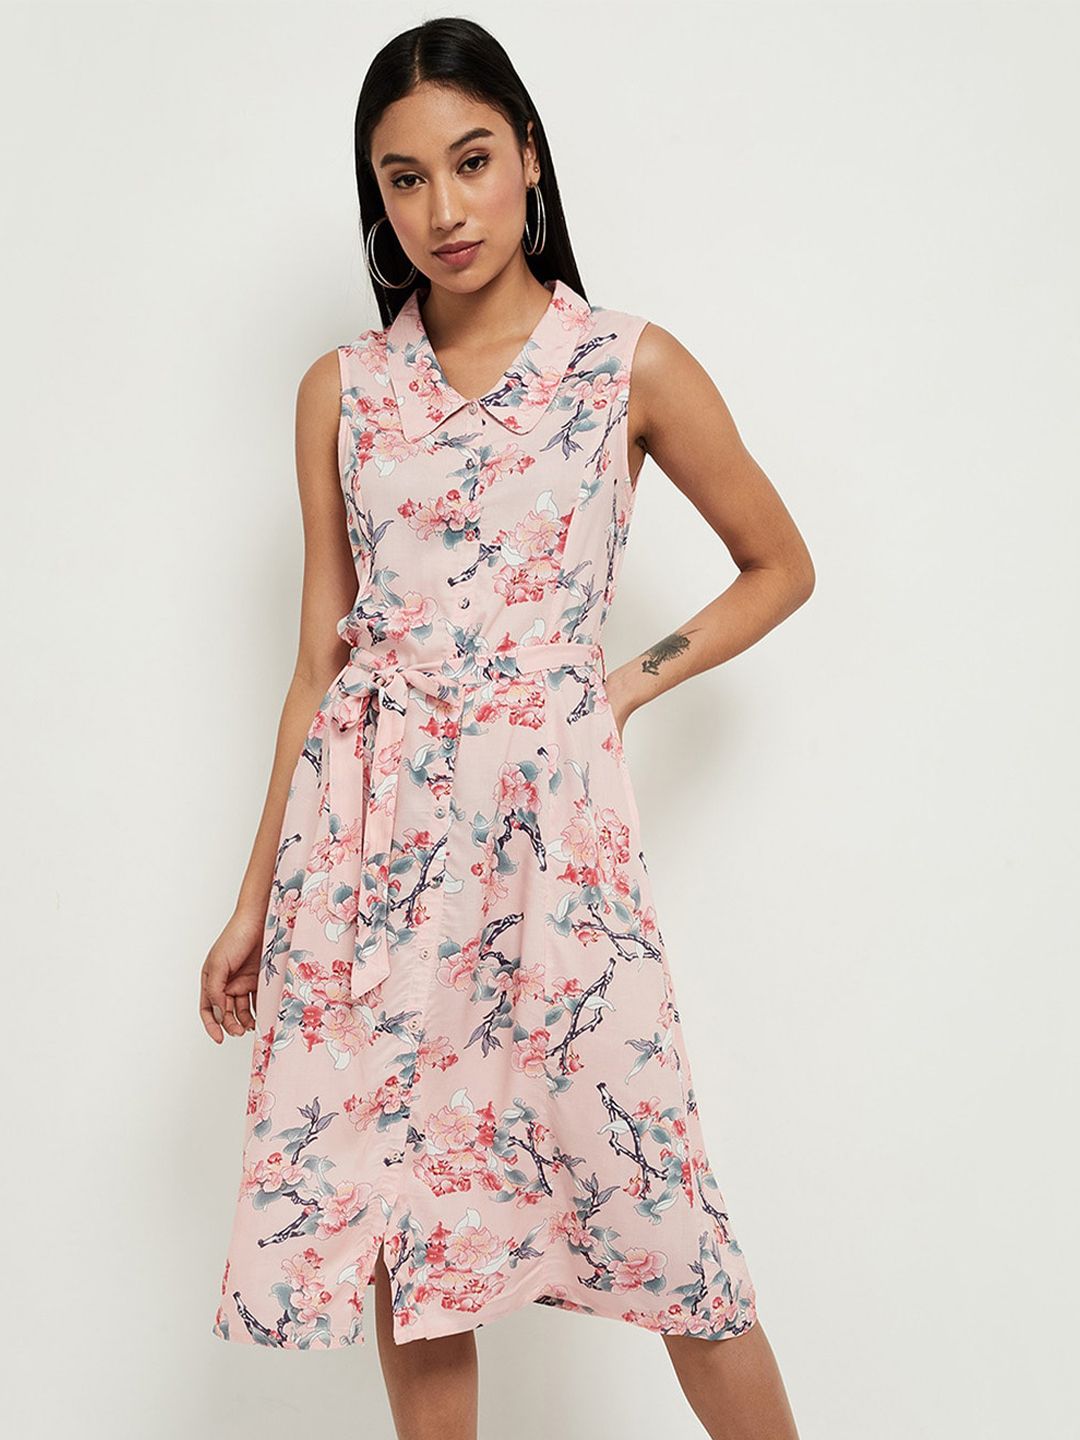 max Women Pink Floral Dress Price in India